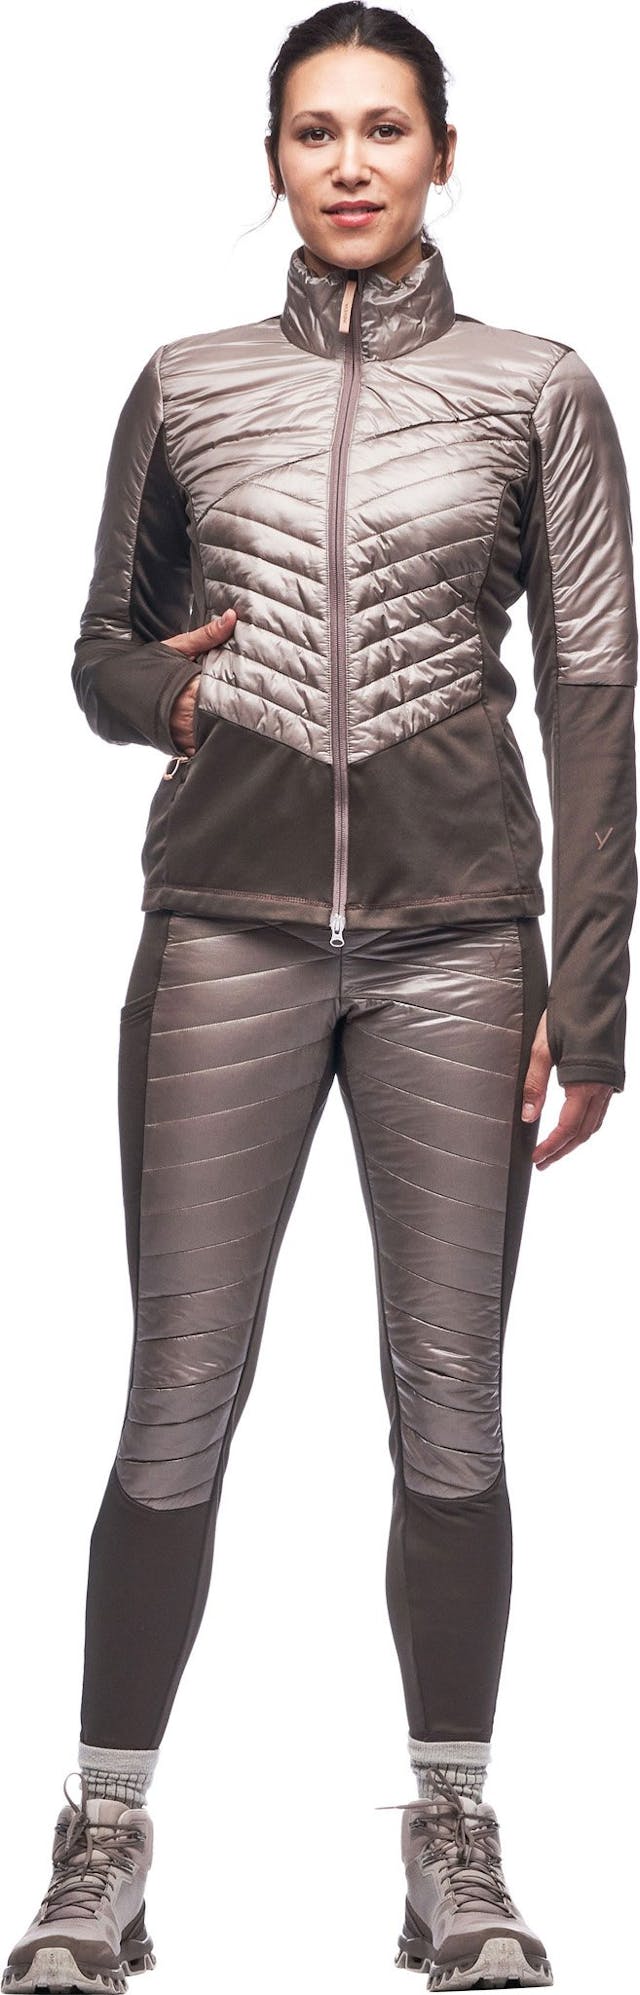 Product image for Calore II Insulated Jacket - Women's